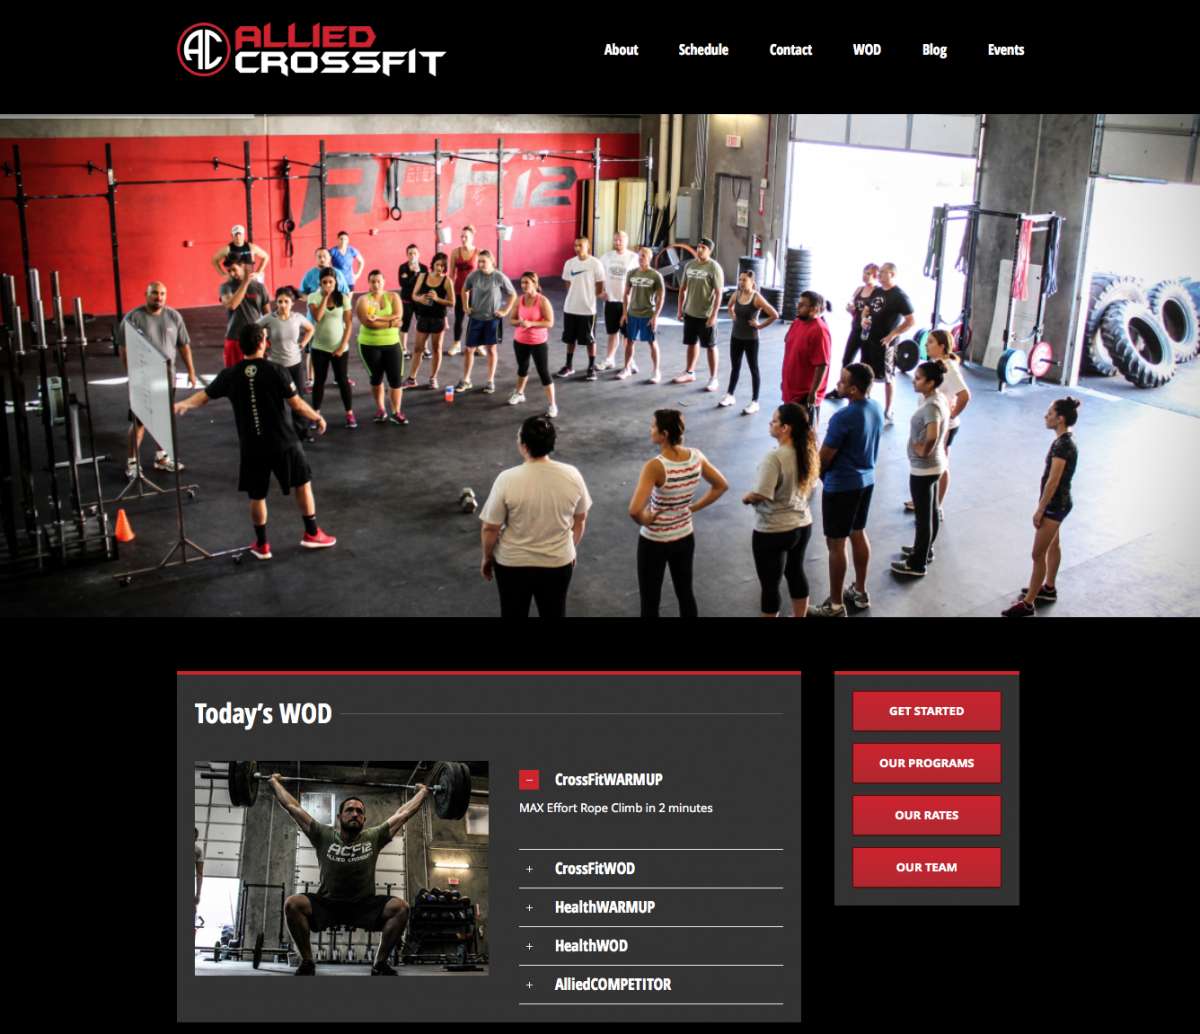 Allied CrossFit goes custom with their website.